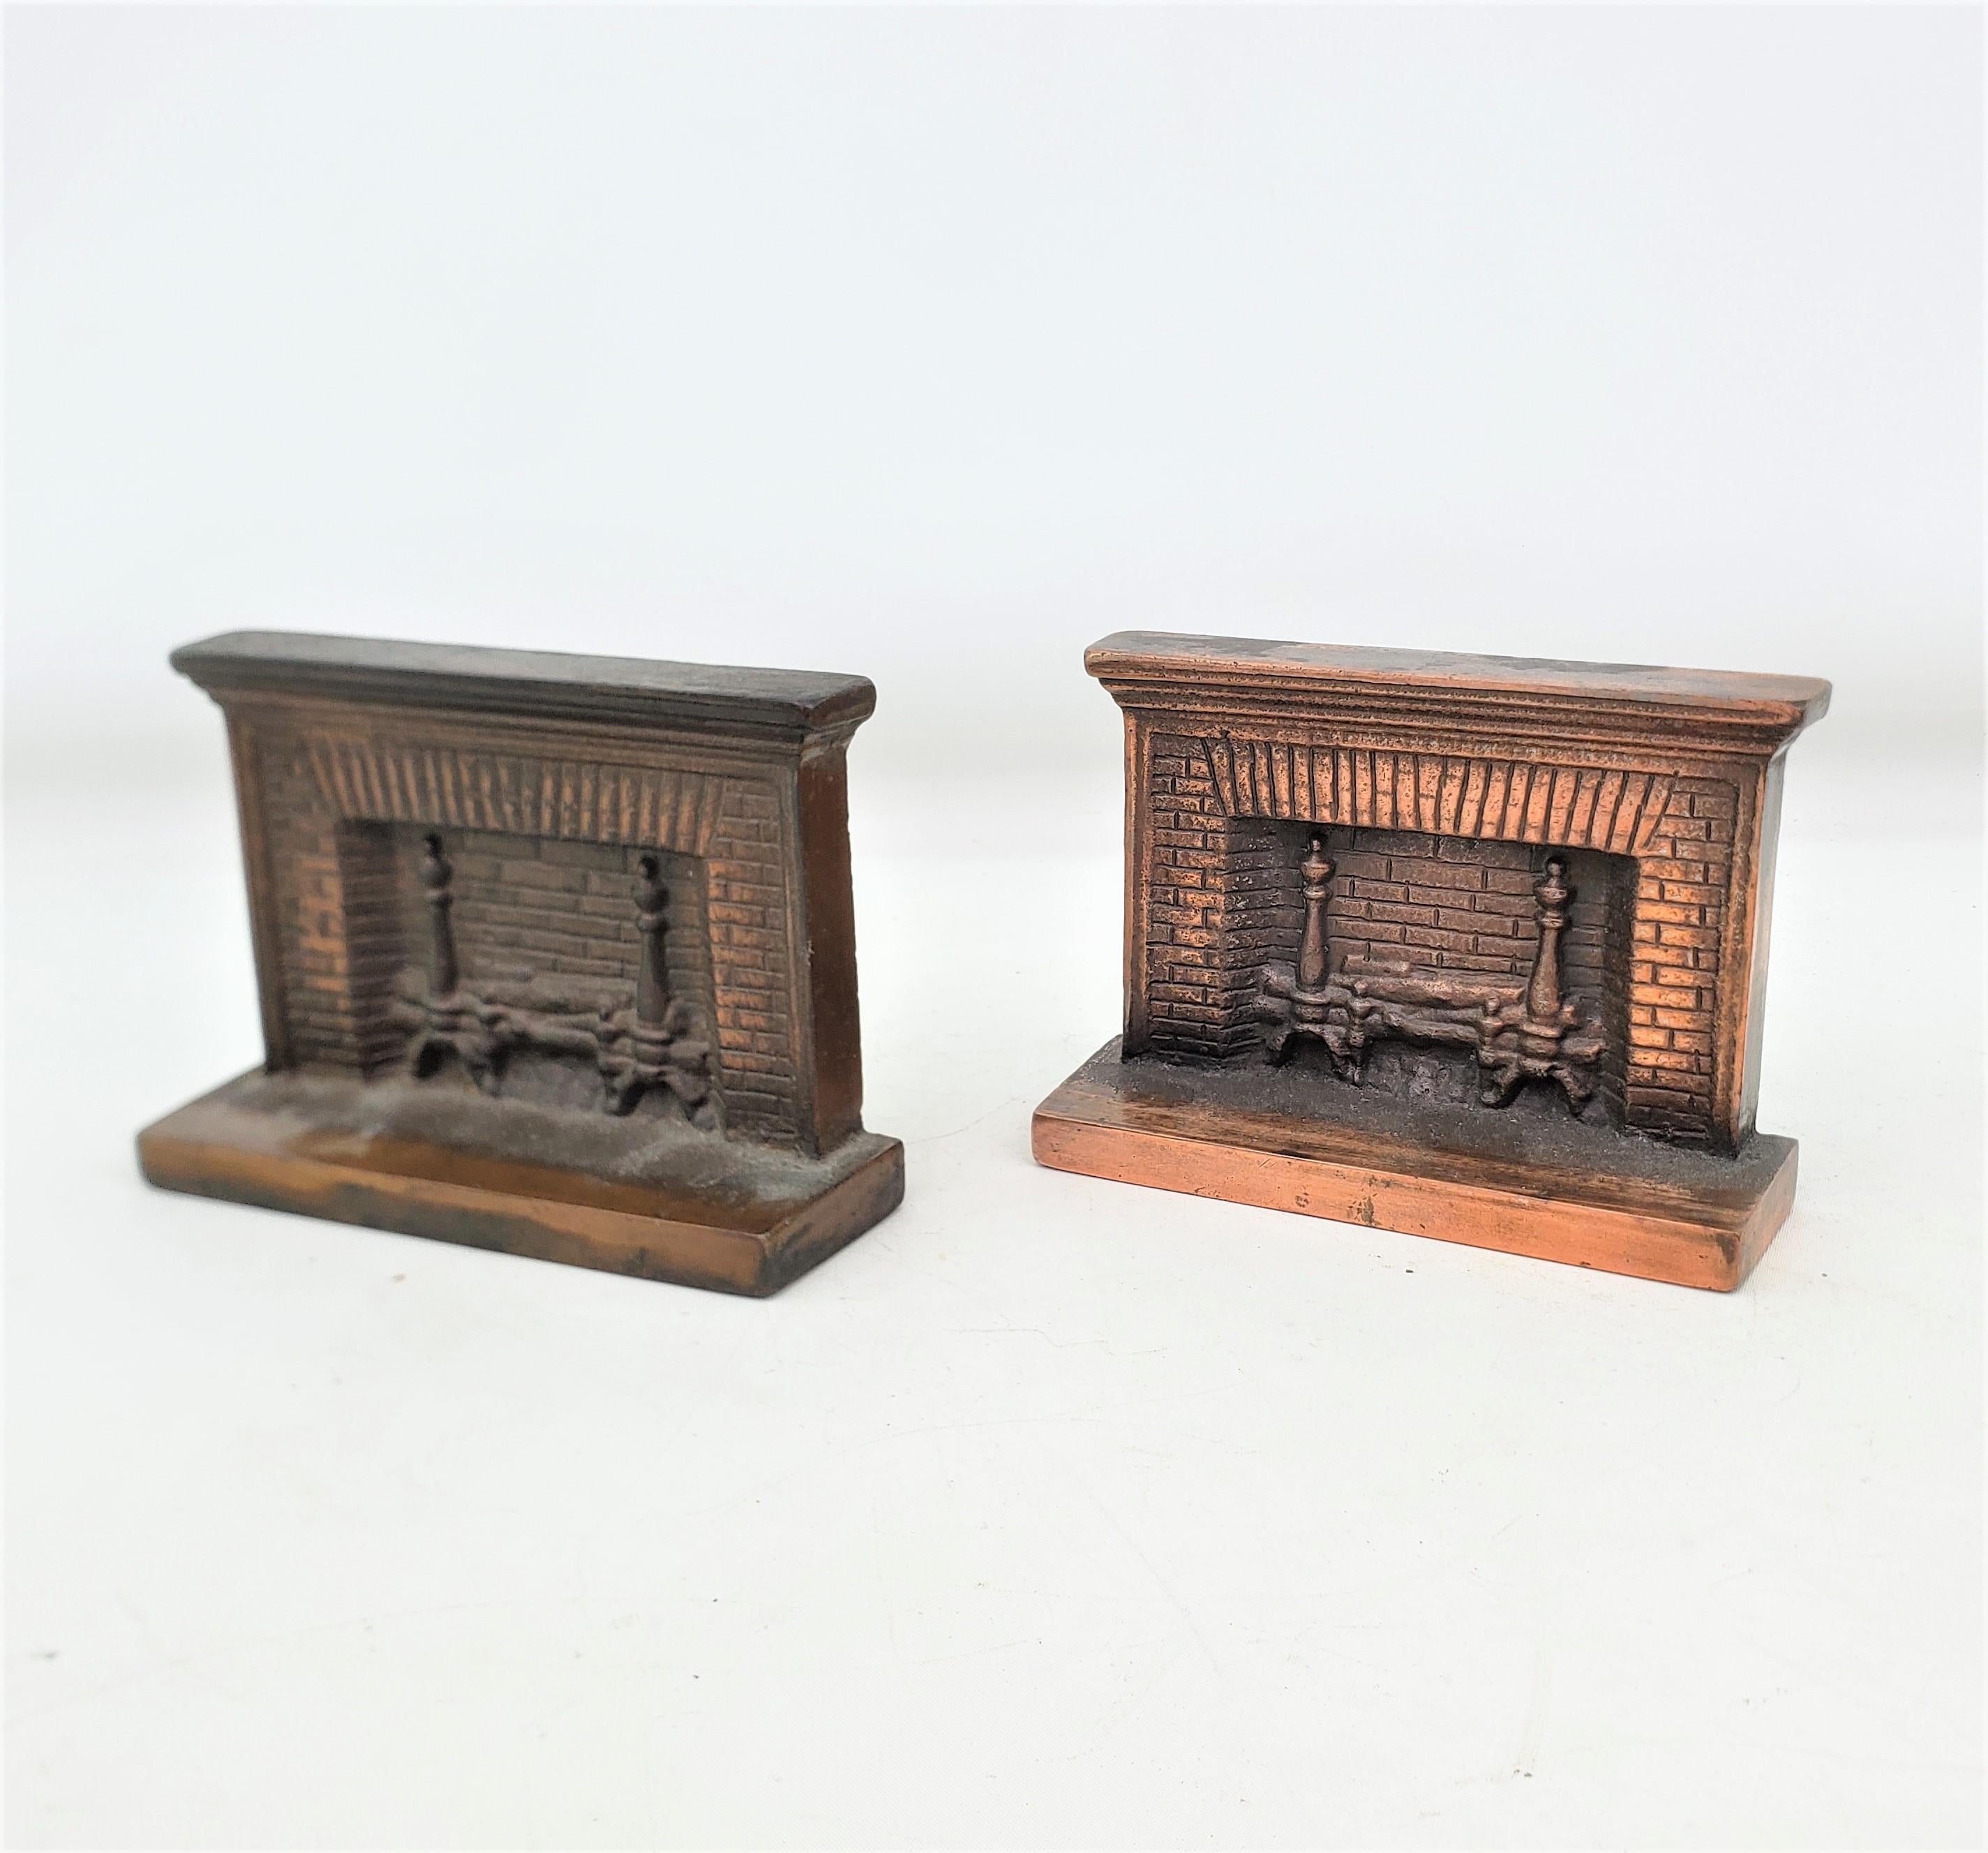 Antique Art Deco Cast & Patinated Bookends Depicting a Figural Brick Fireplace  In Good Condition For Sale In Hamilton, Ontario